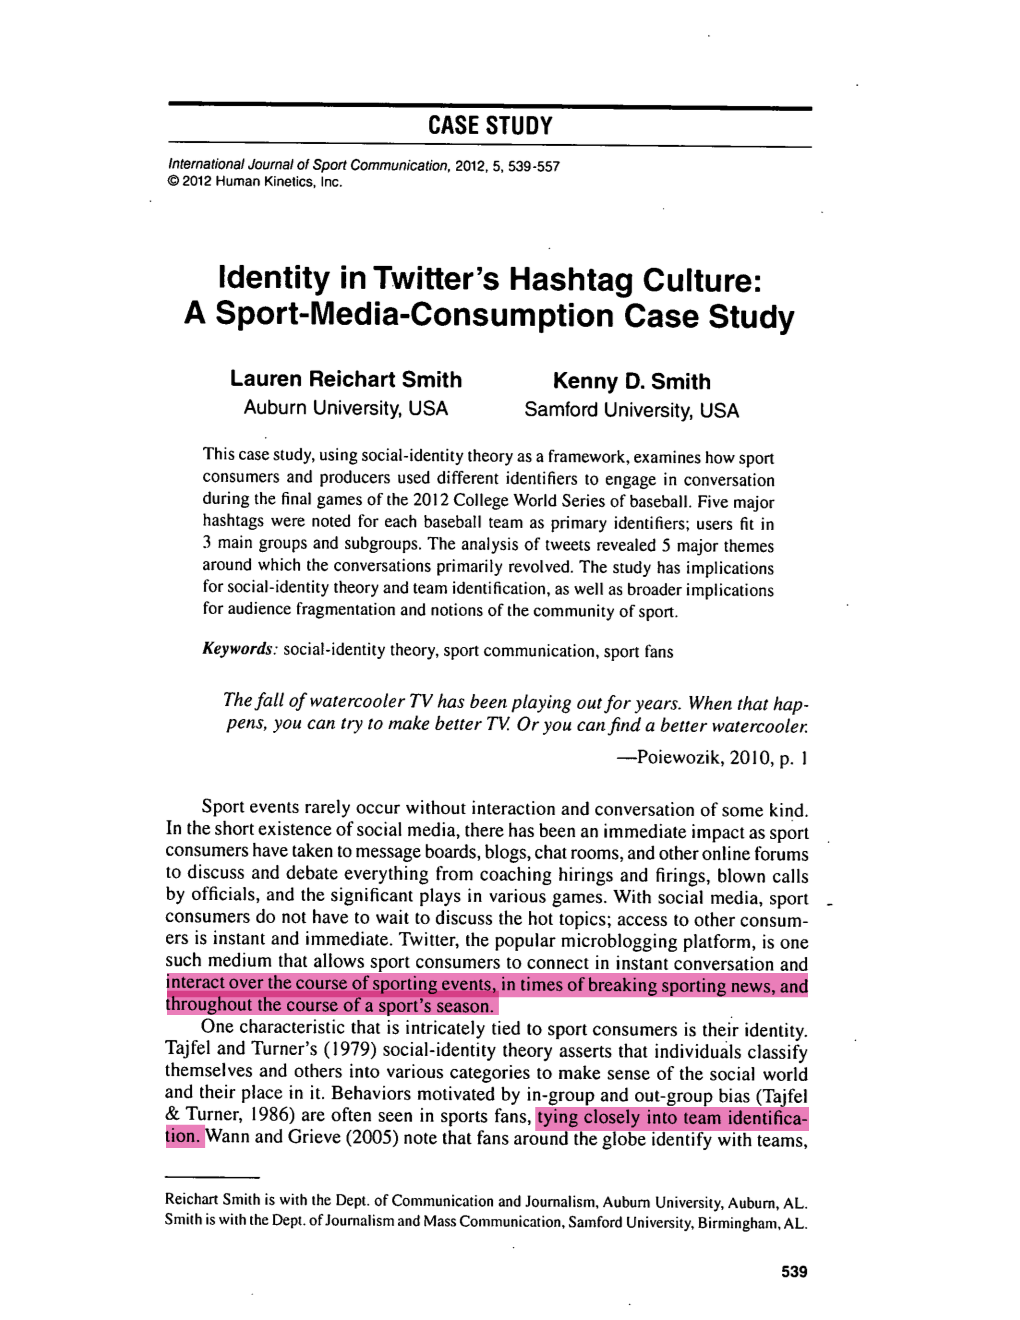 Identity in Twitter's Hashtag Culture: a Sport-Media-Consumption Case Study